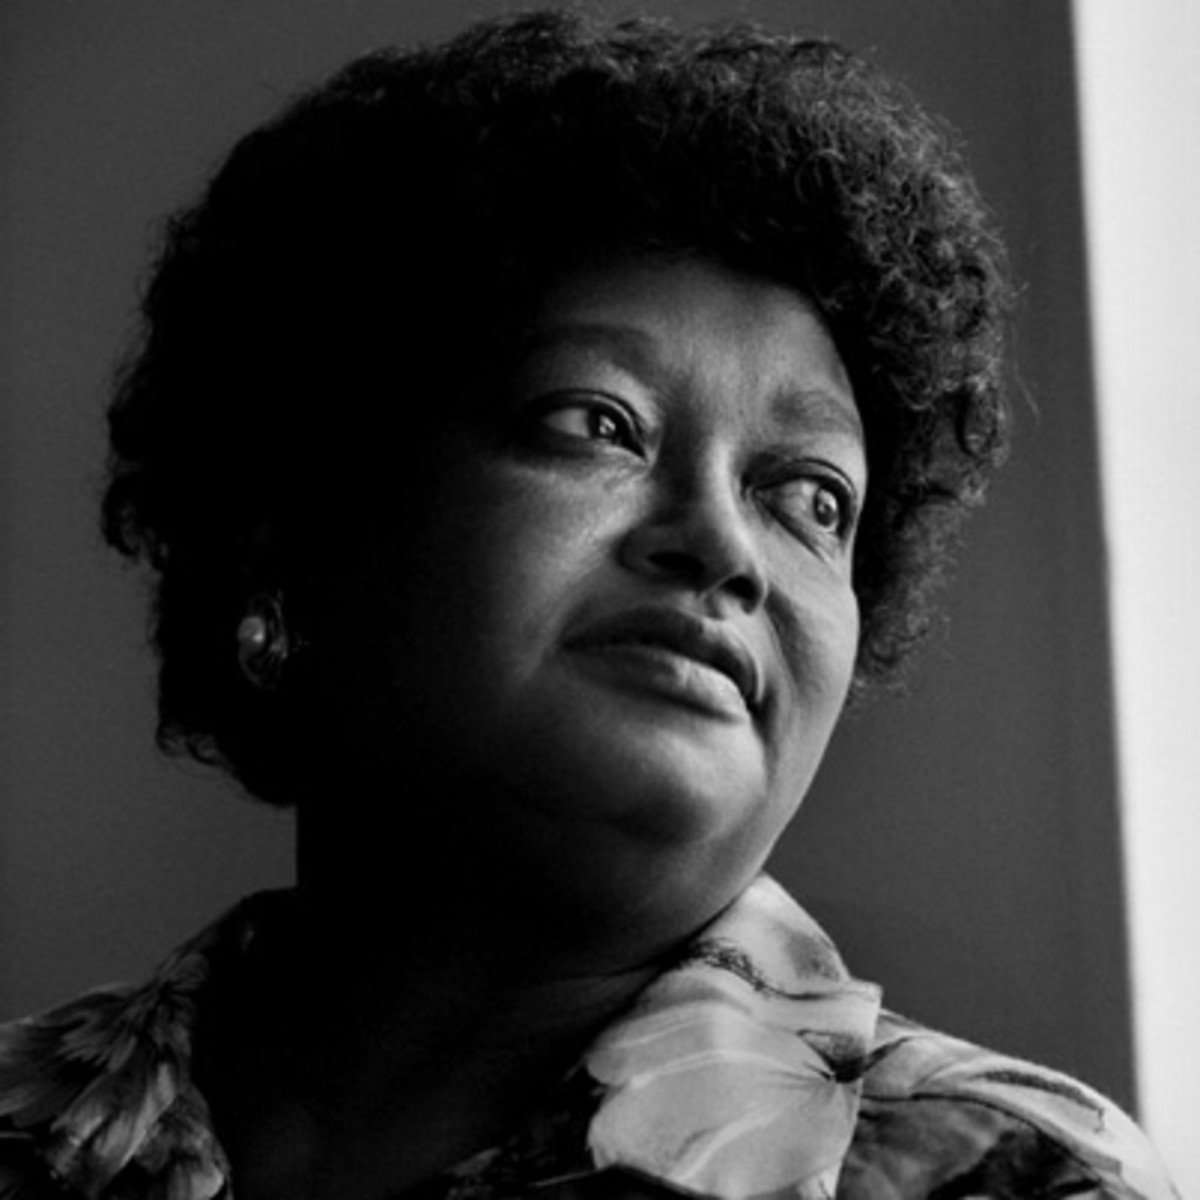 image for TIL about Claudette Colvin, a 15 year old African American girl from Montgomery, AL who was arrested in 1955 after she refused to give up her seat on a bus to a white woman, telling the bus driver, "It's my constitutional right to sit here." She did this 9 months prior to Rosa Parks' famous protest.